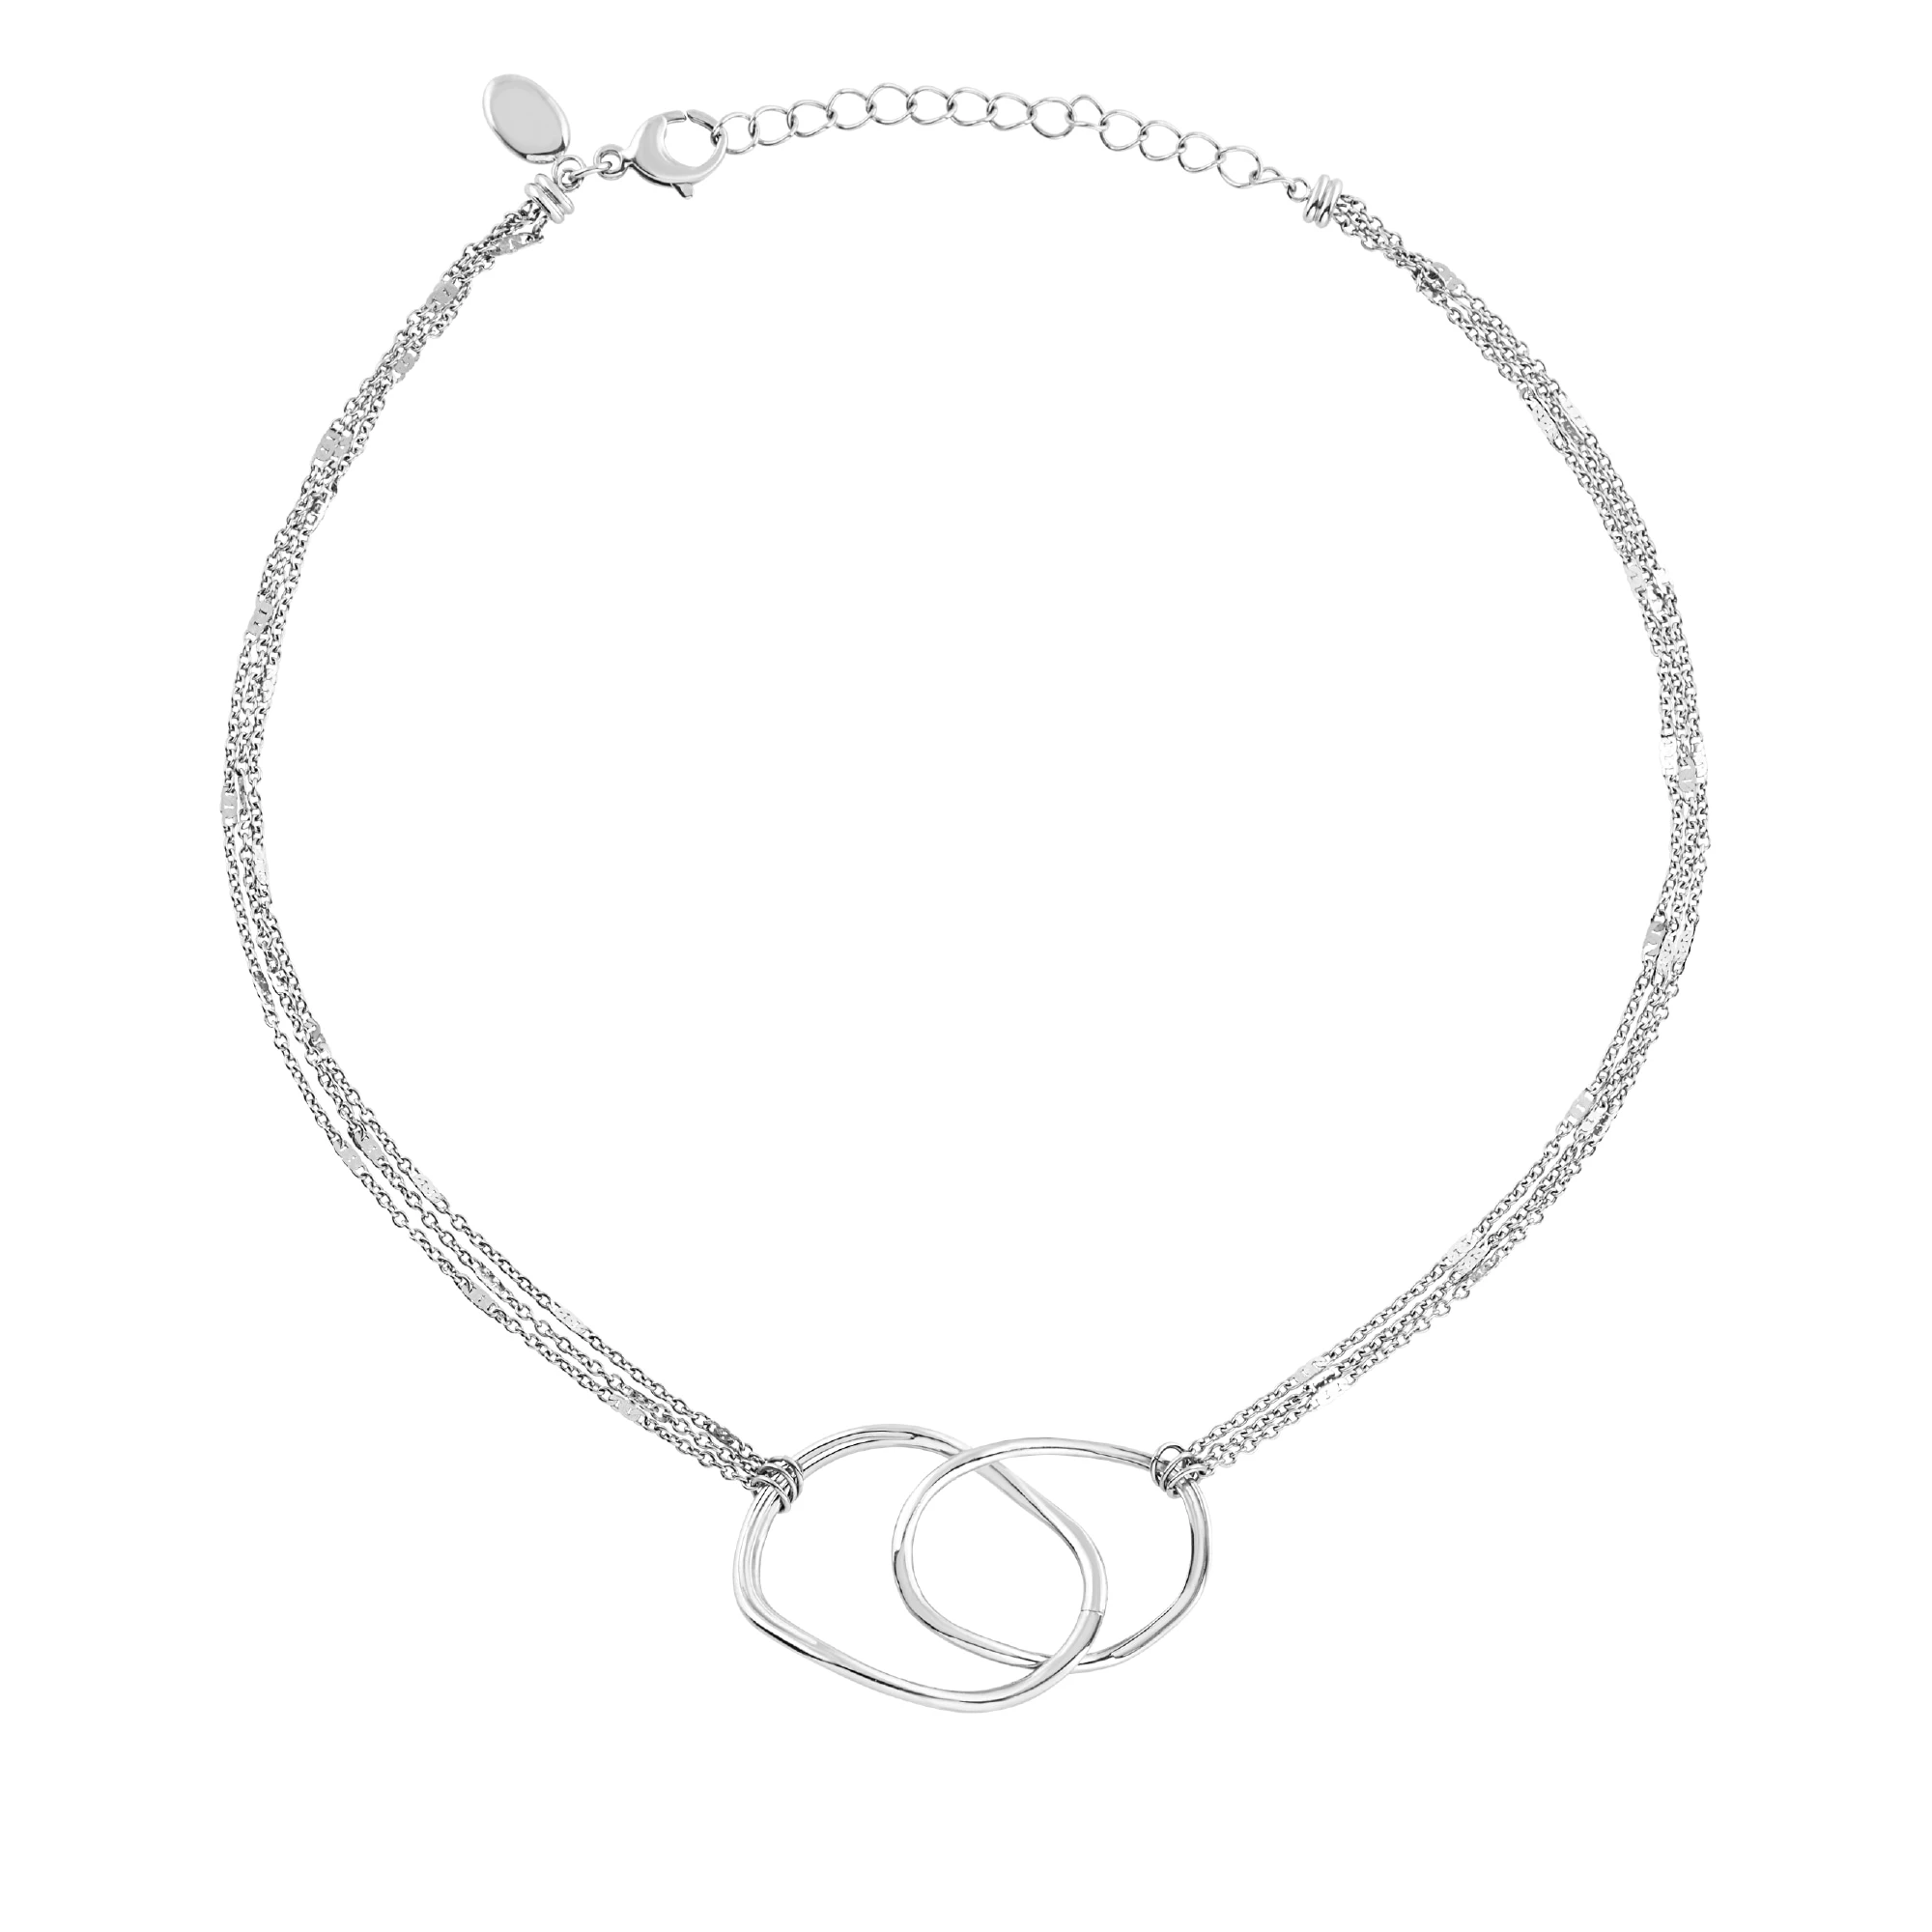 B WIRED - STAINLESS STEEL NECKLACE - 1 - TJ3417 | Breil